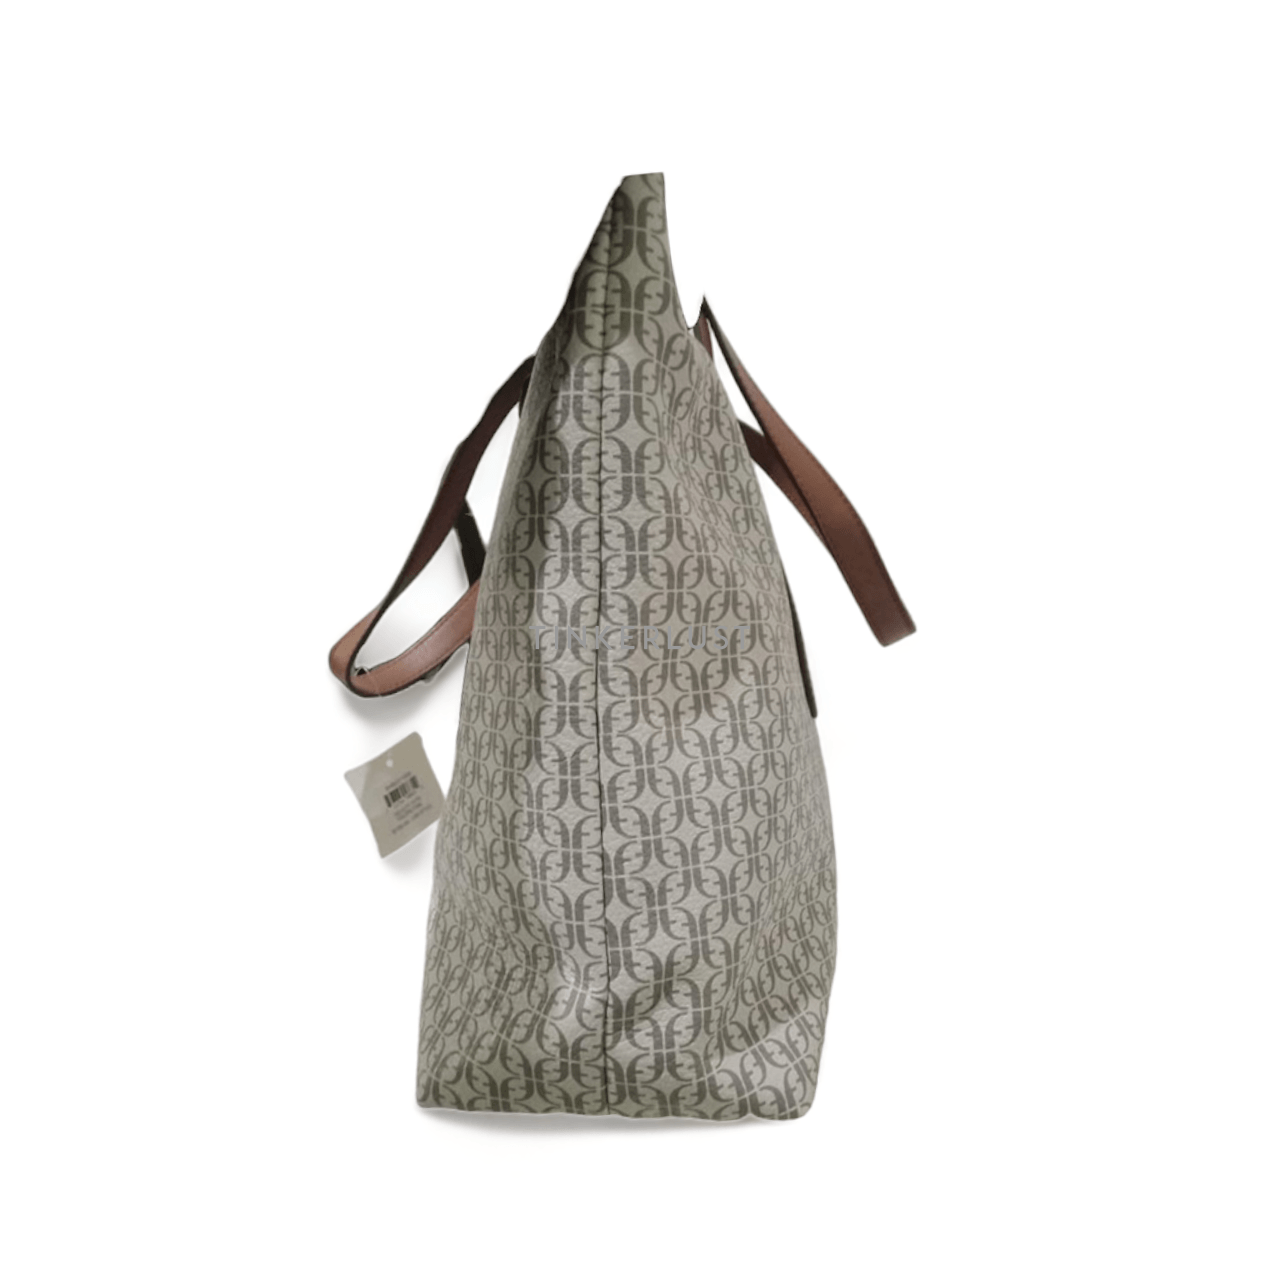 Fossil Felicity Tote Taupe/Tan